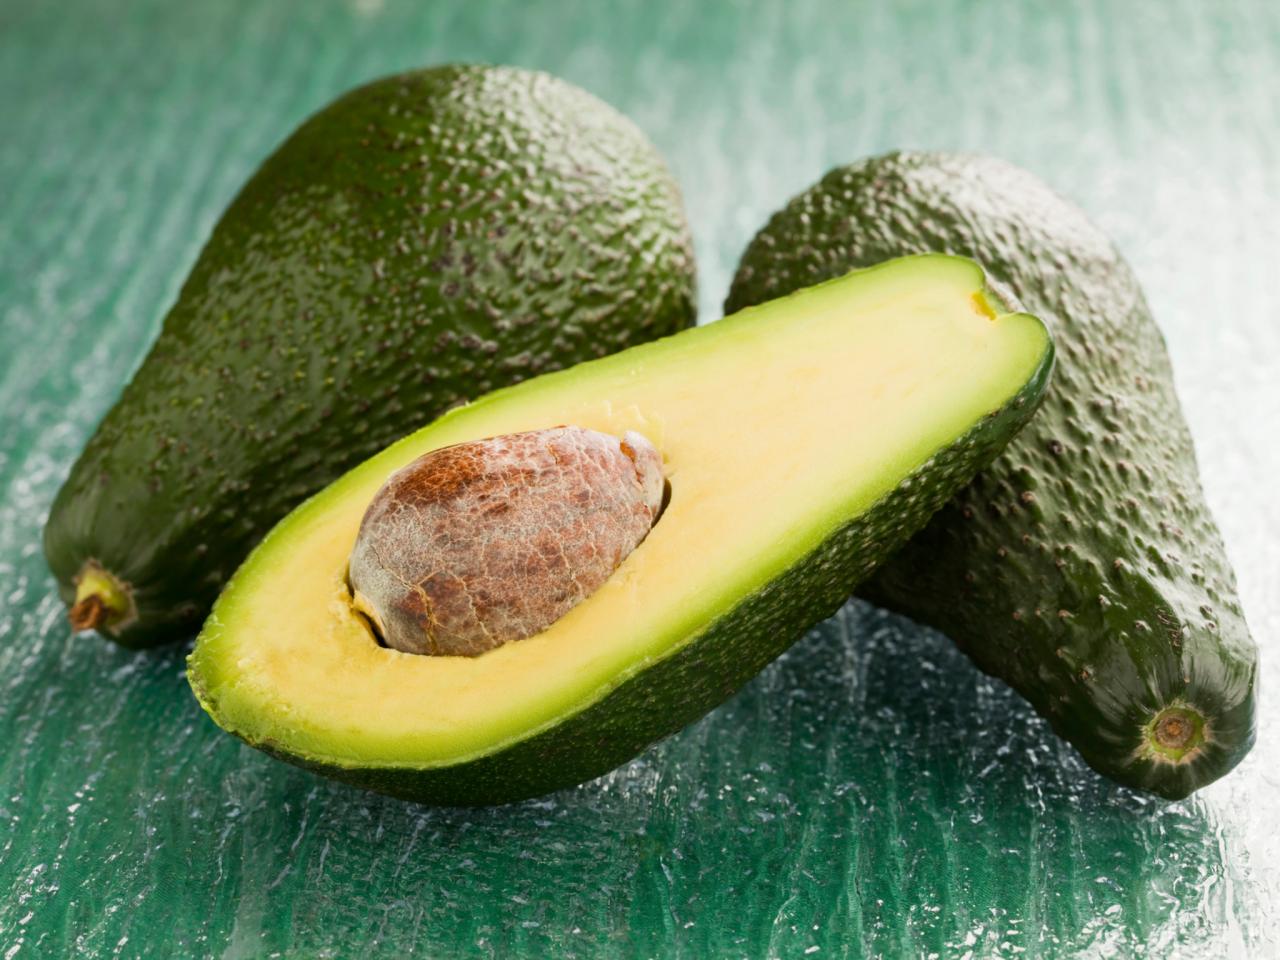 How To Grow Avocado From Seeds